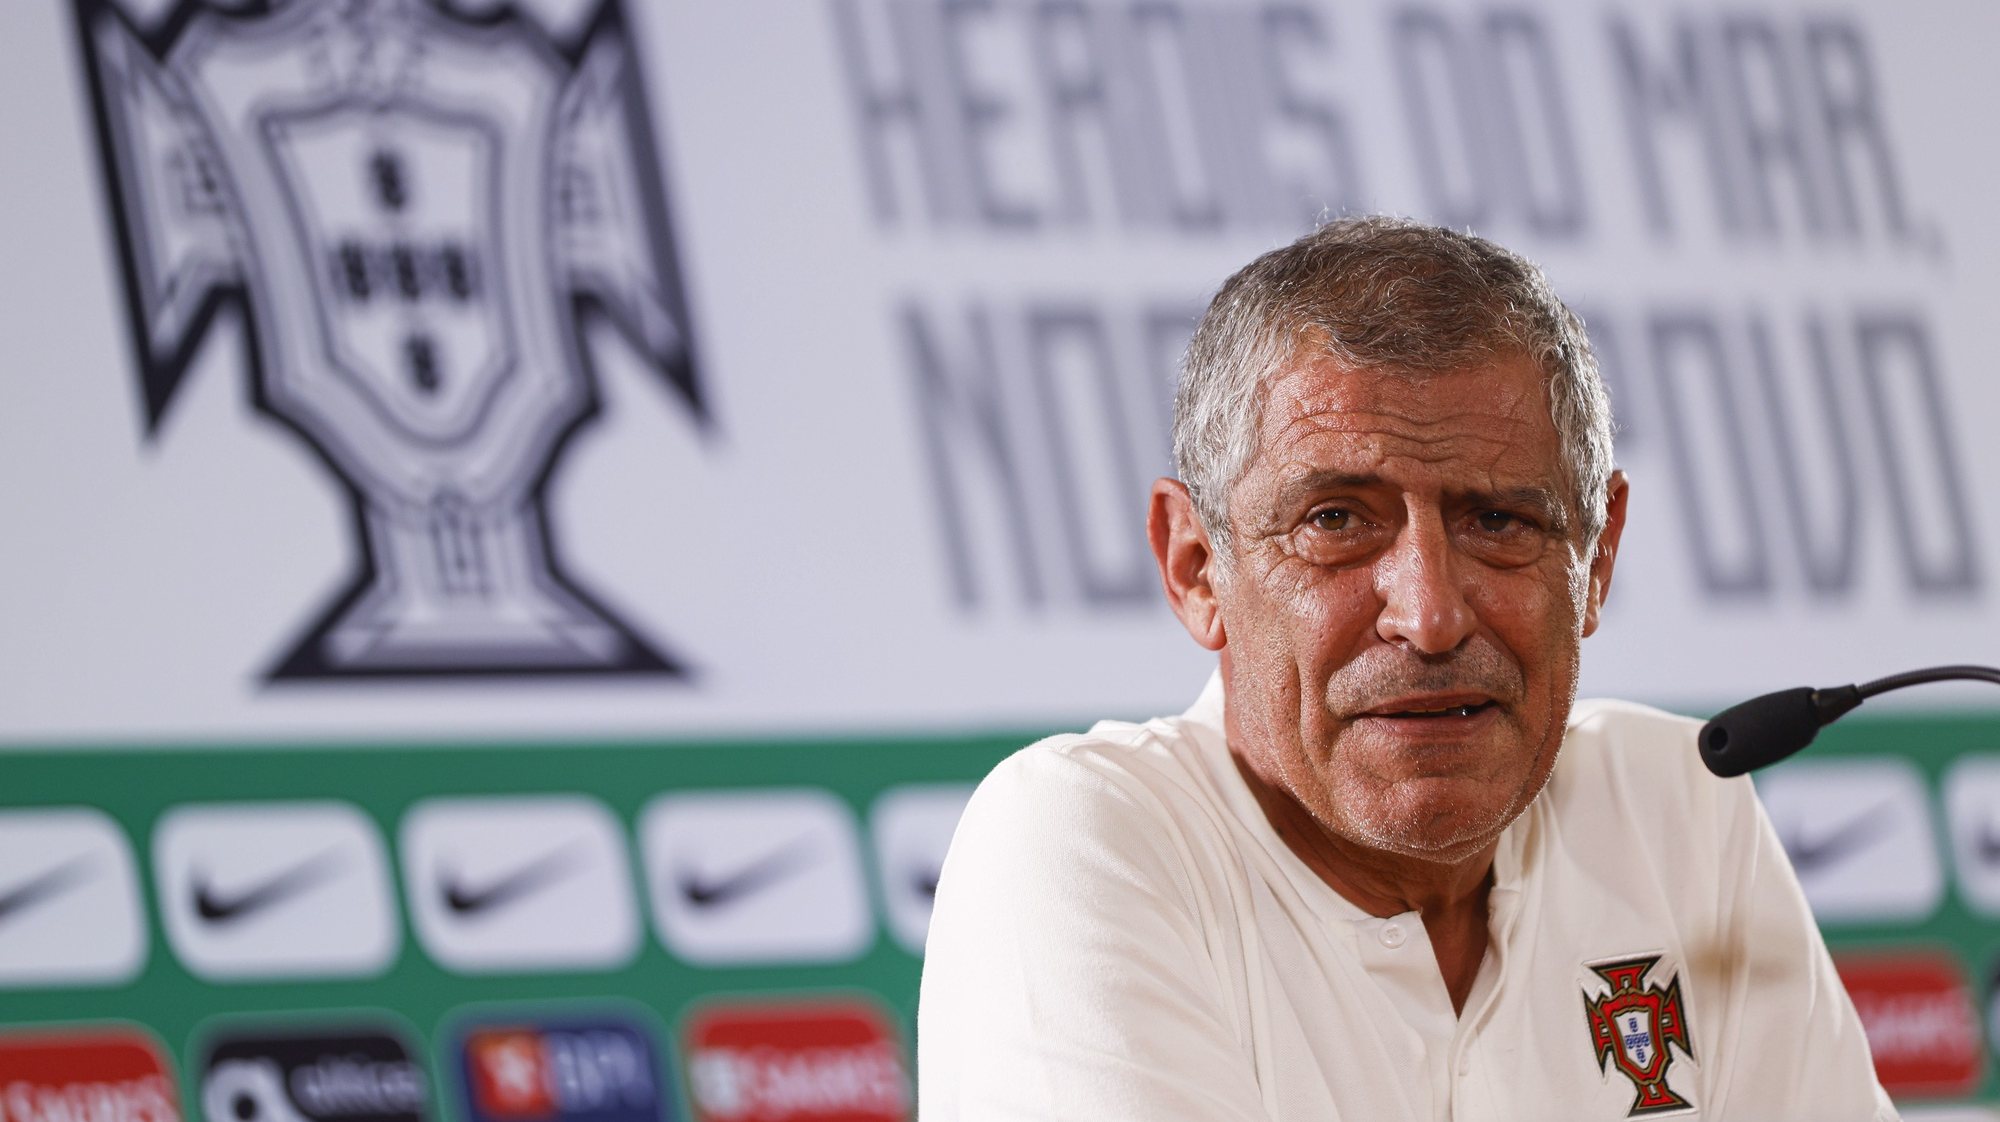 epa08725207 A handout photo made available by Portugal Football Federation shows Portugal national soccer team head coach, Fernando Santos, during a press conference at Alvalade Stadium in Lisbon, Portugal, 06 October 2020. Portugal will face Spain in their international soccer friendly match on 07 October 2020.  EPA/DIOGO PINTO / HANDOUT  HANDOUT EDITORIAL USE ONLY/NO SALES